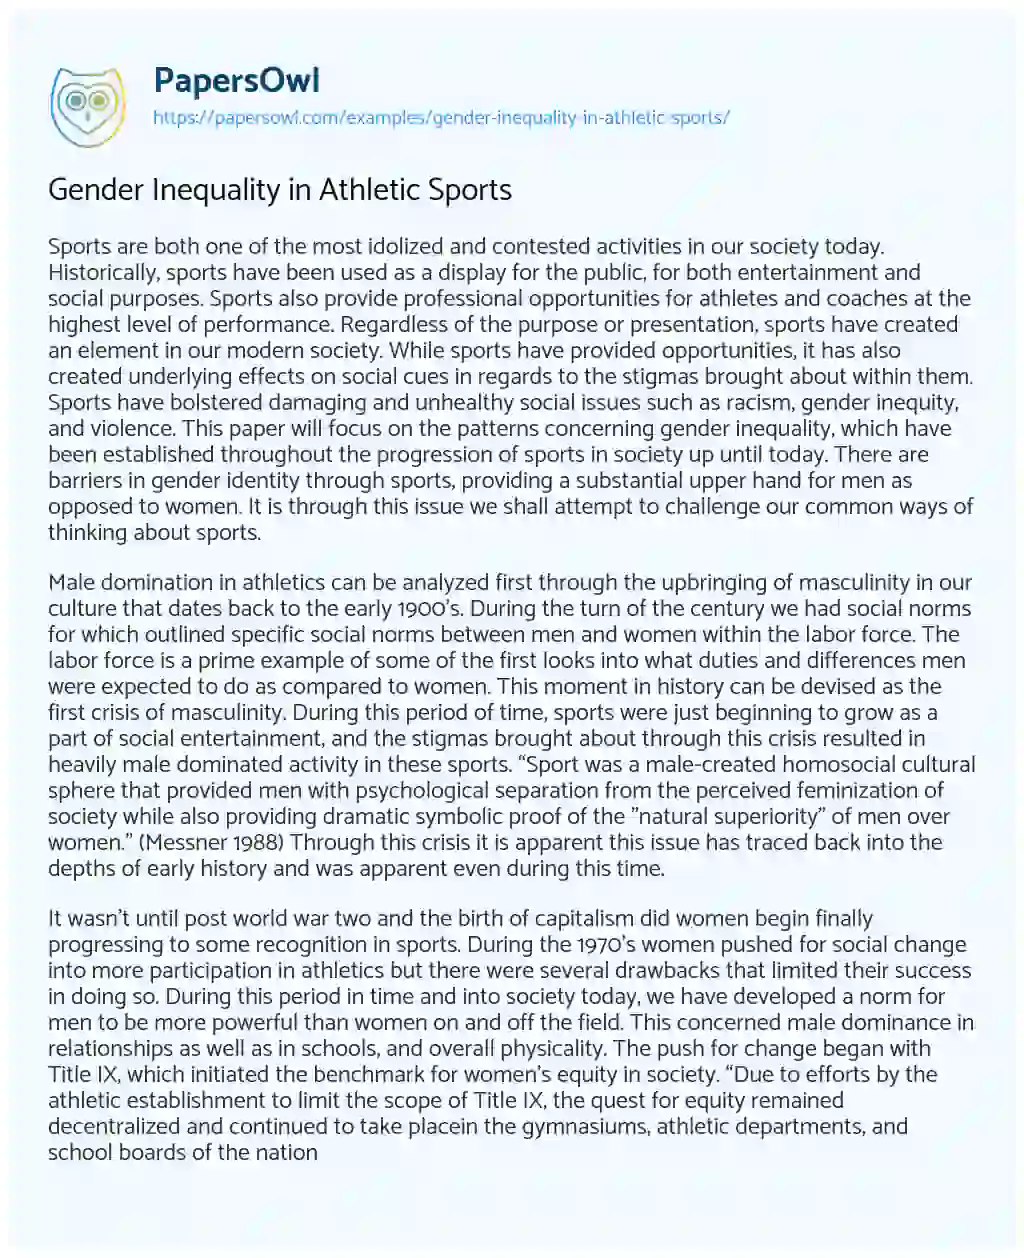 Essay on Gender Inequality in Athletic Sports